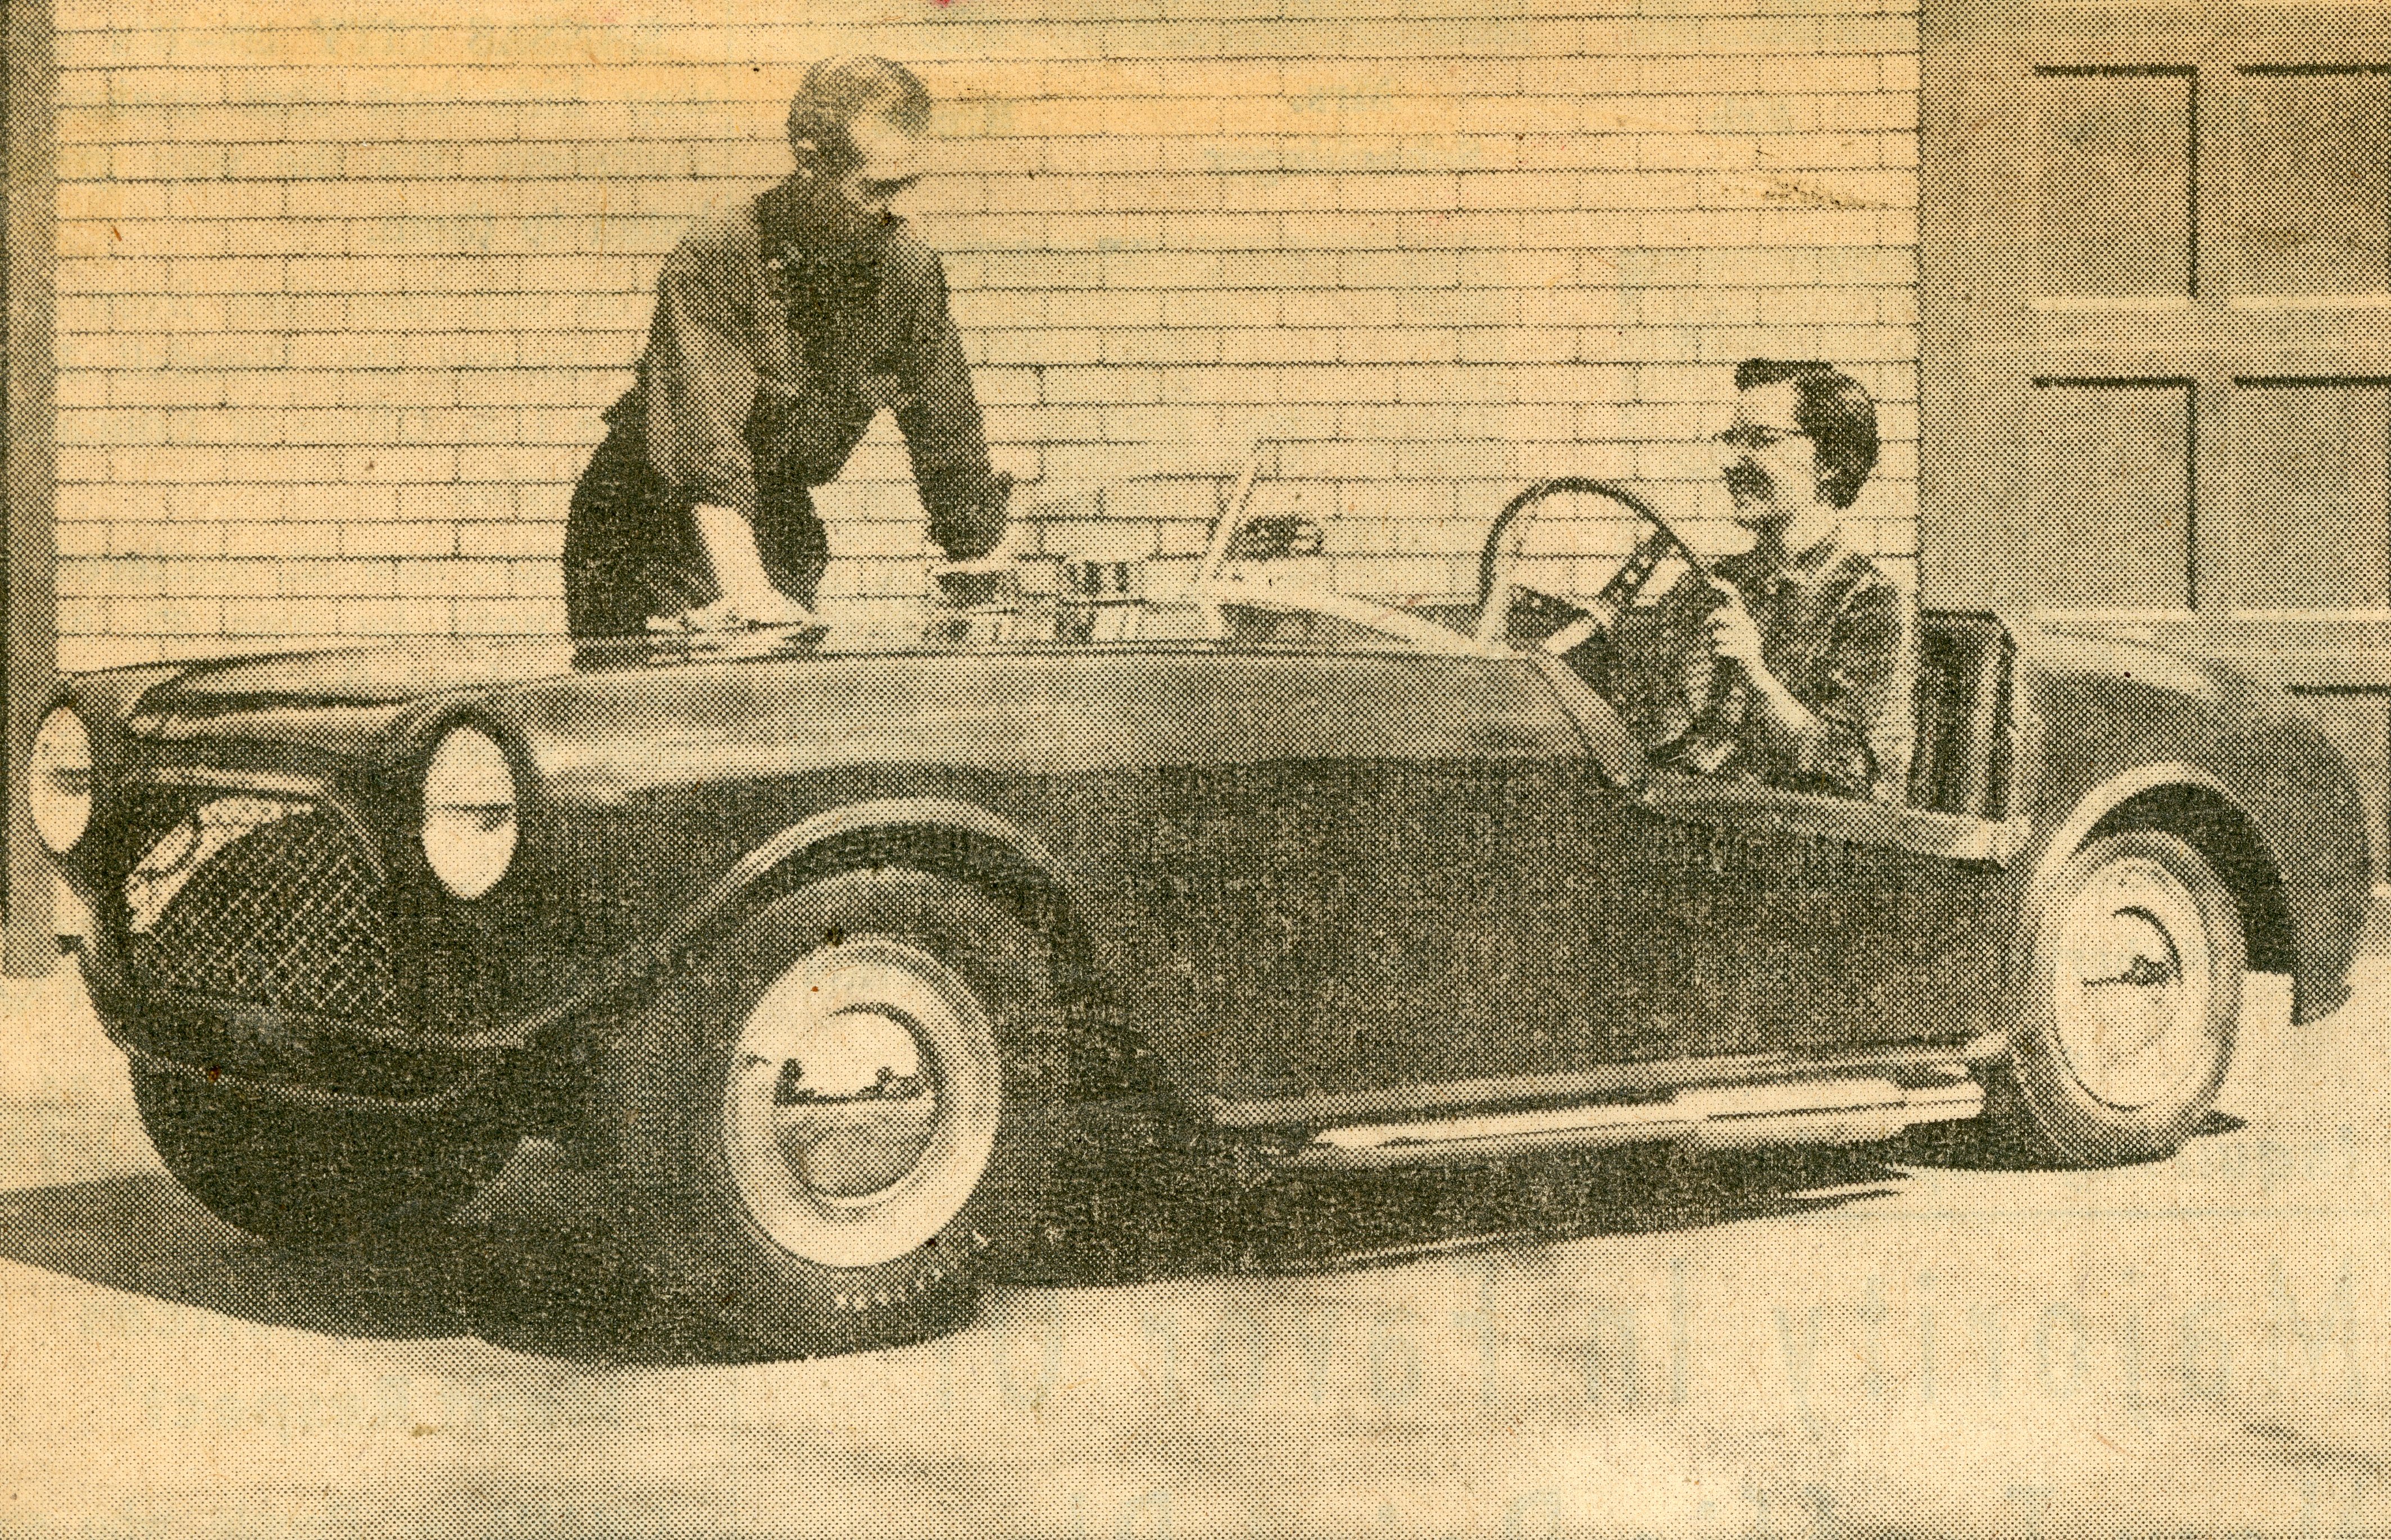 Photo of Alfred Clemens standing by his custom-built car with his wife in the driver's seat